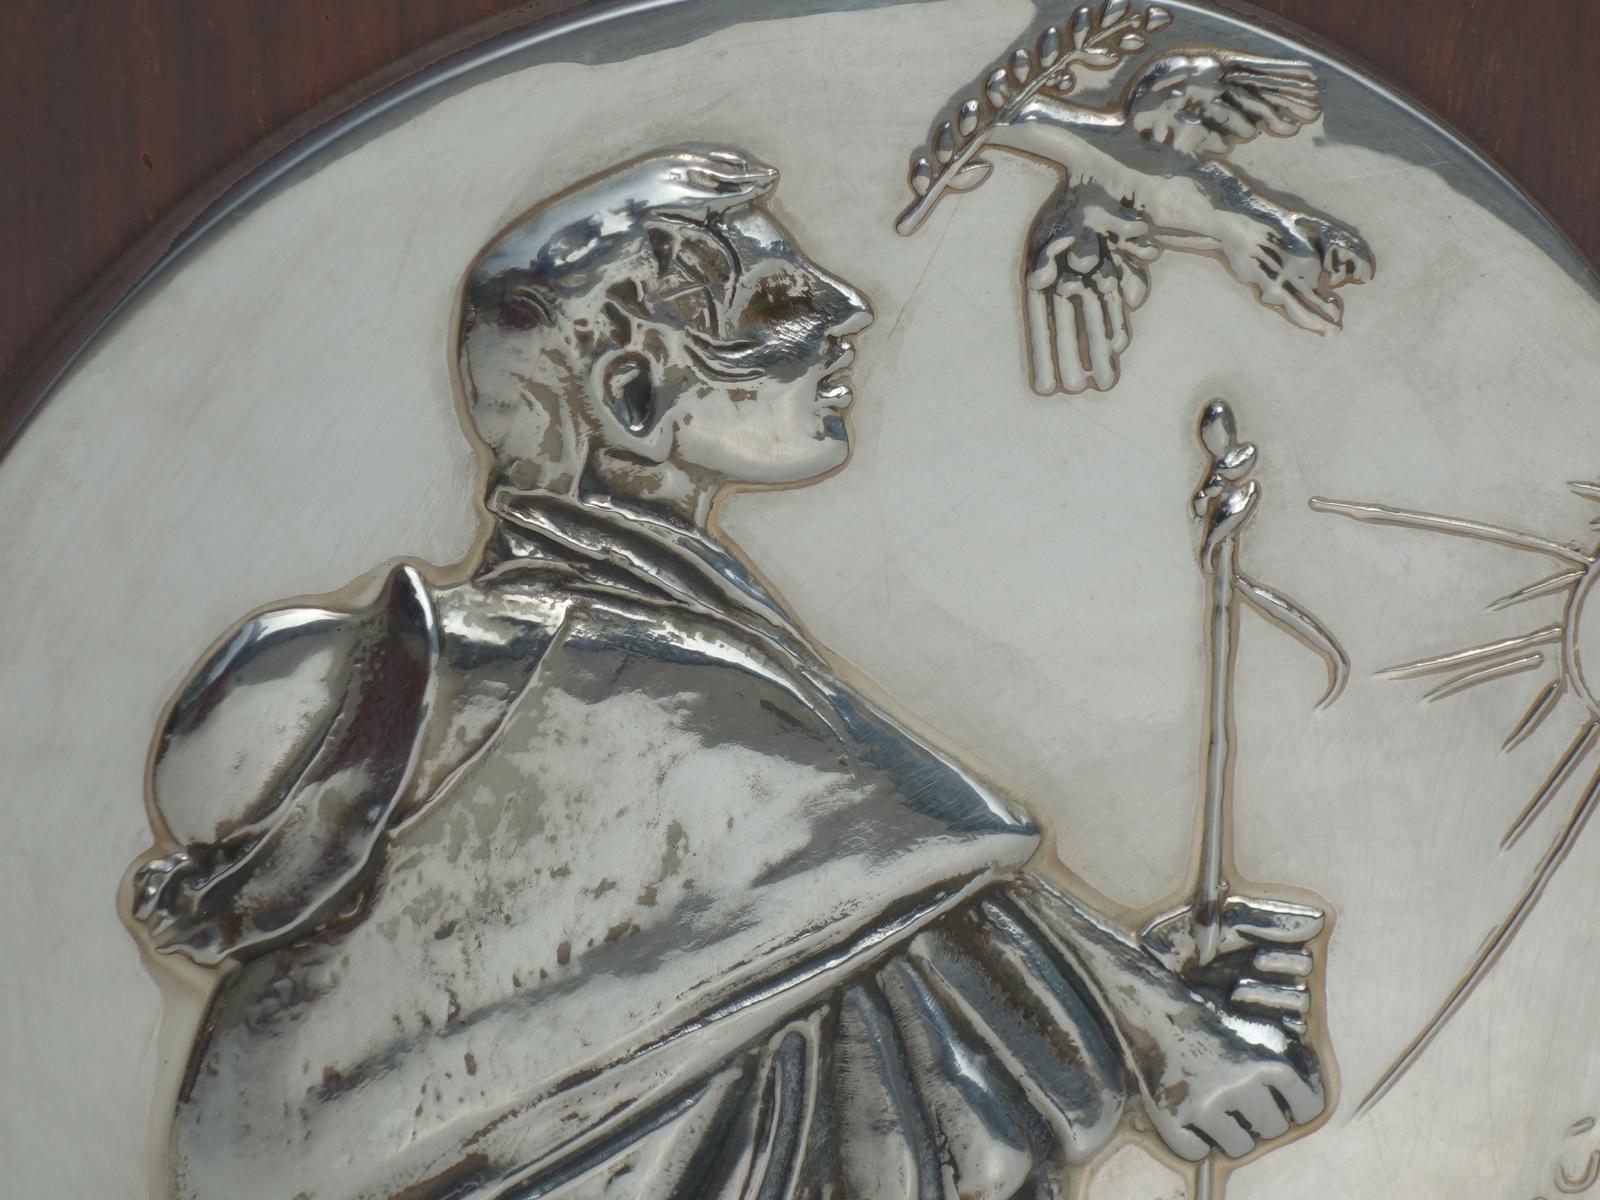 Giacomo Manzù, 1975
Silver relief by legendary Italian sculptor Giacomo Manzù. This rare piece was made by The Franklin Mint in during the artists lifetime and was an authorized casting. 20cm in diameter, incise signed, Sterling Silver